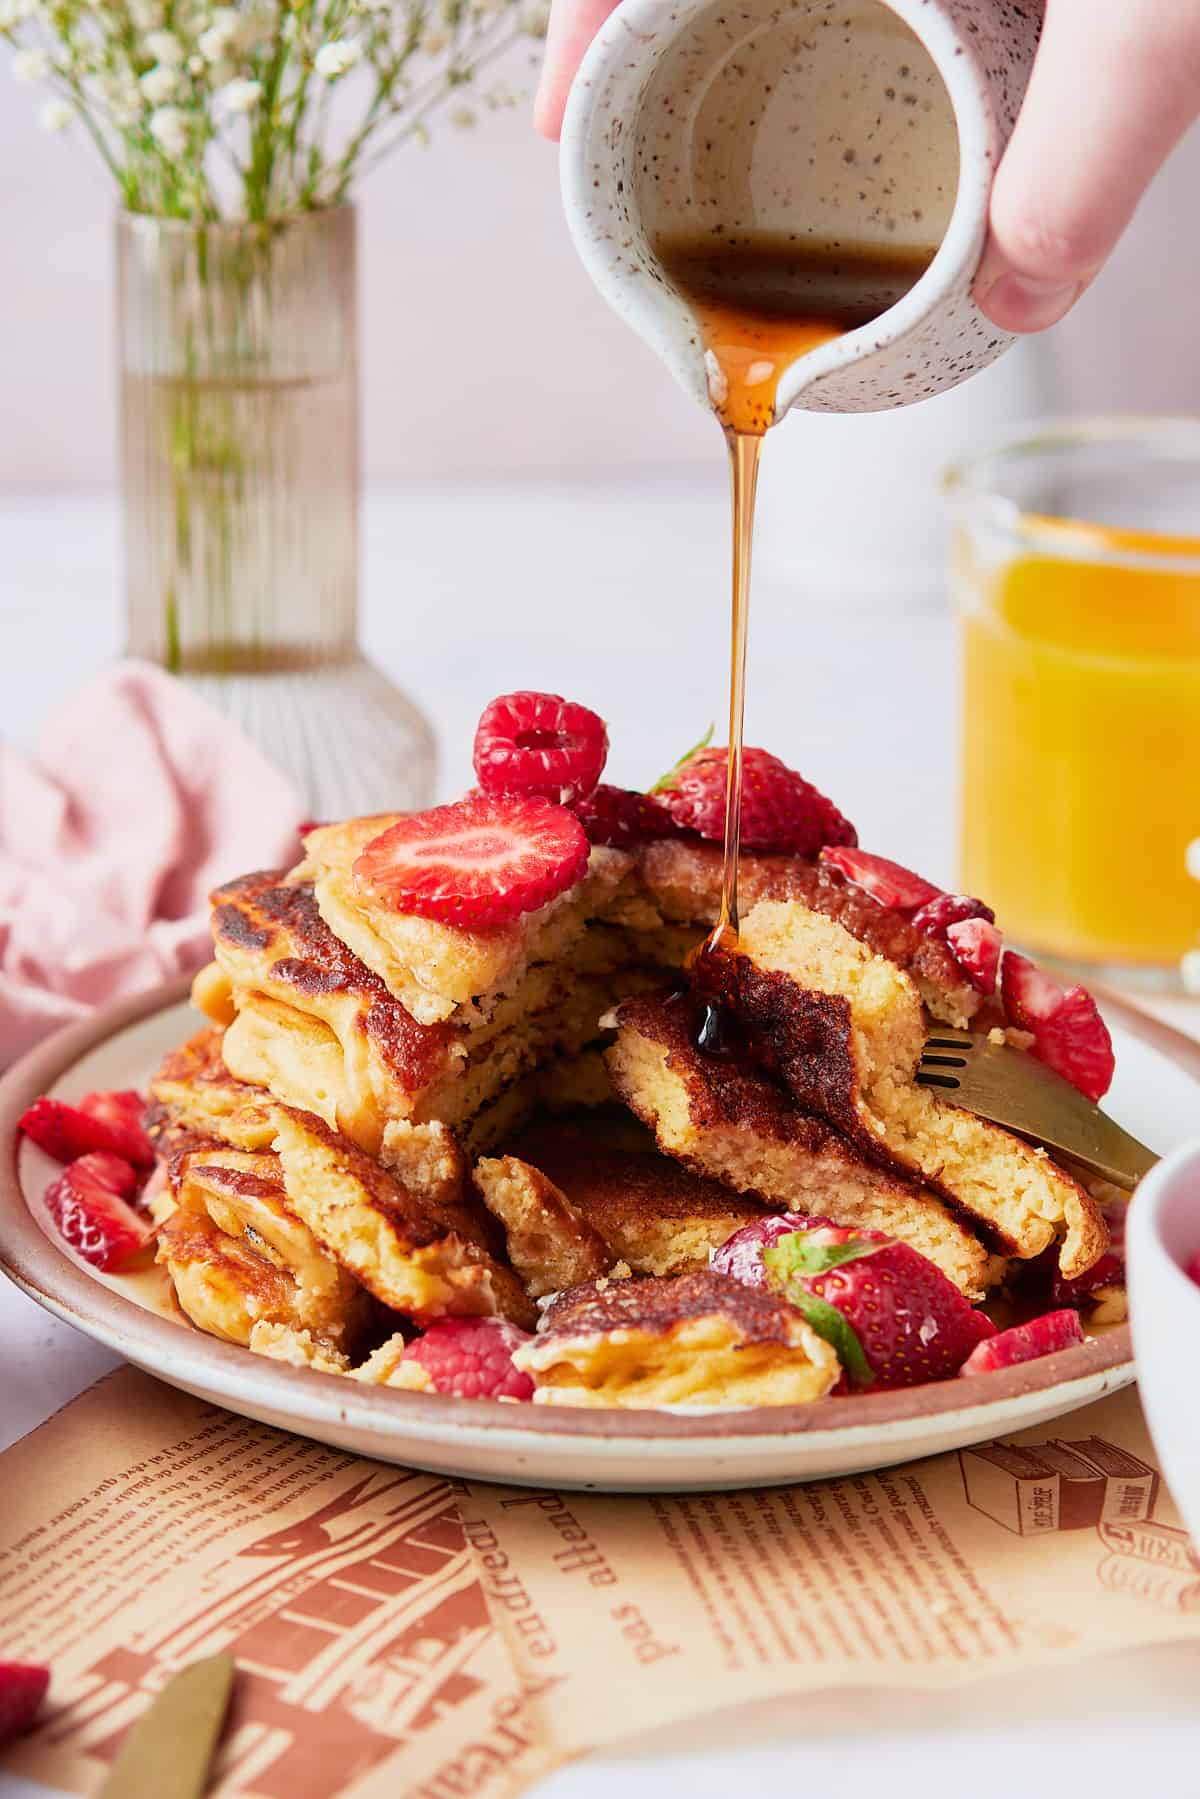 Stack of sweet cream pancakes with berries on top and a hand pouring maple syrup onto the stack, with a bite taken out of the side to reveal the delicious fluffy interior.